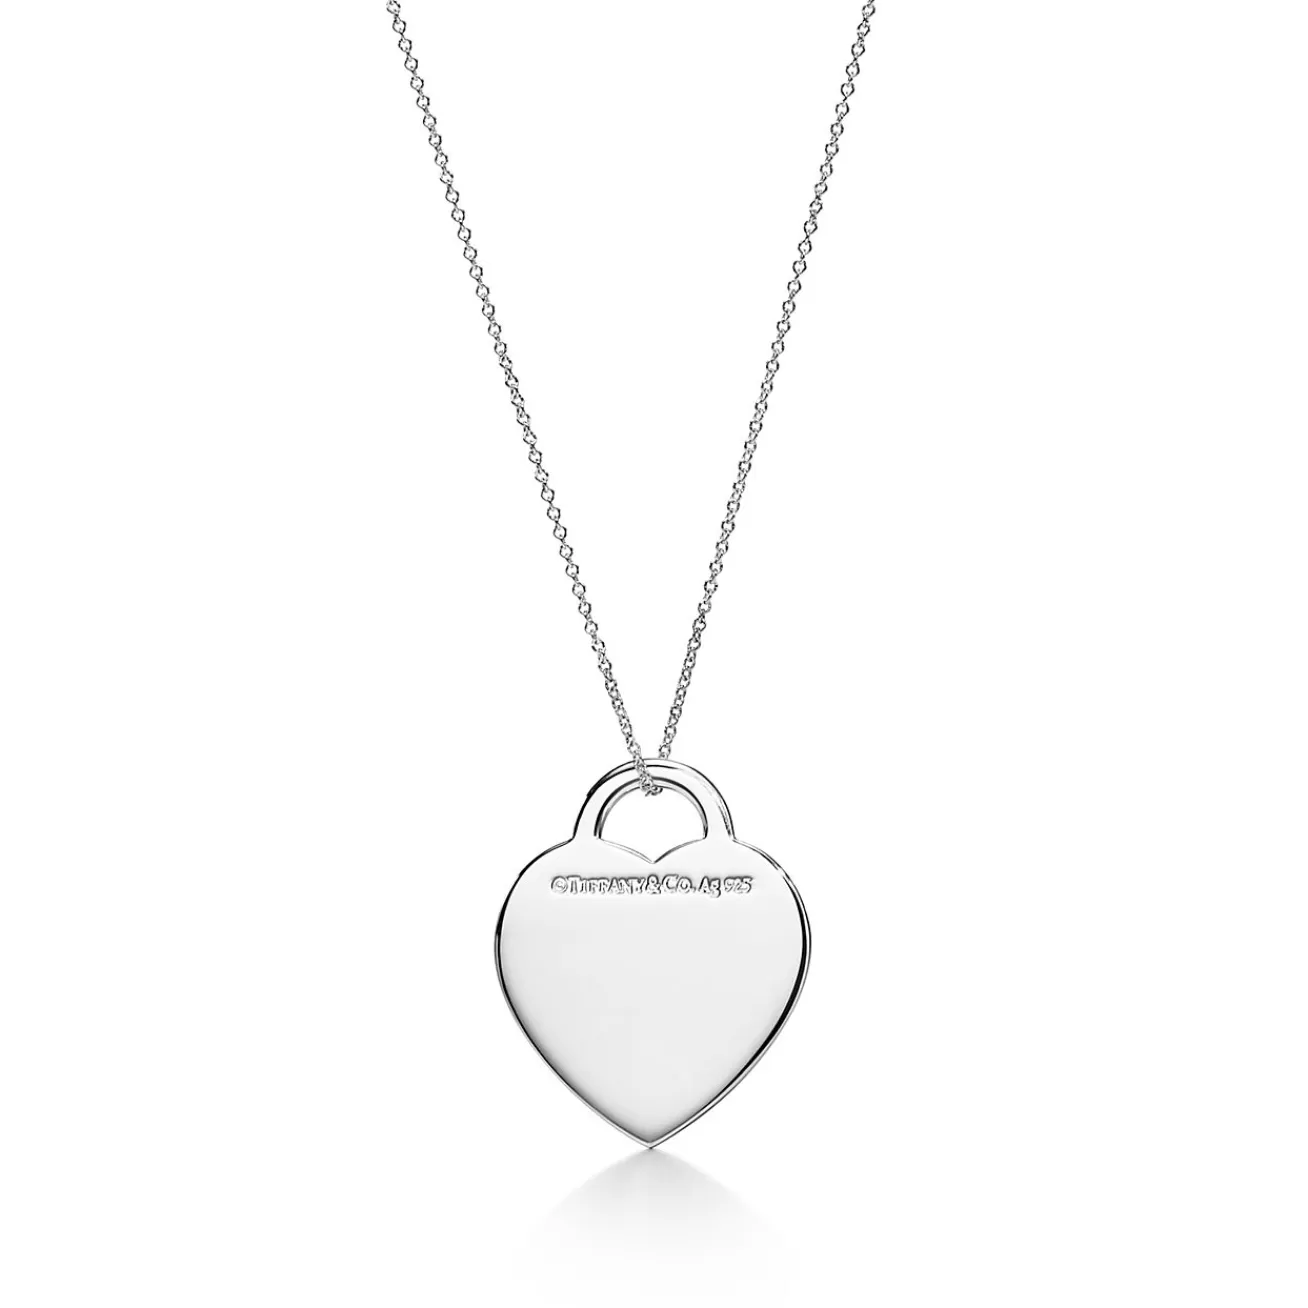 Tiffany & Co. Return to Tiffany® "Love You" Heart Tag Pendant in Silver and Tiffany Blue® | ^ Necklaces & Pendants | Sterling Silver Jewelry